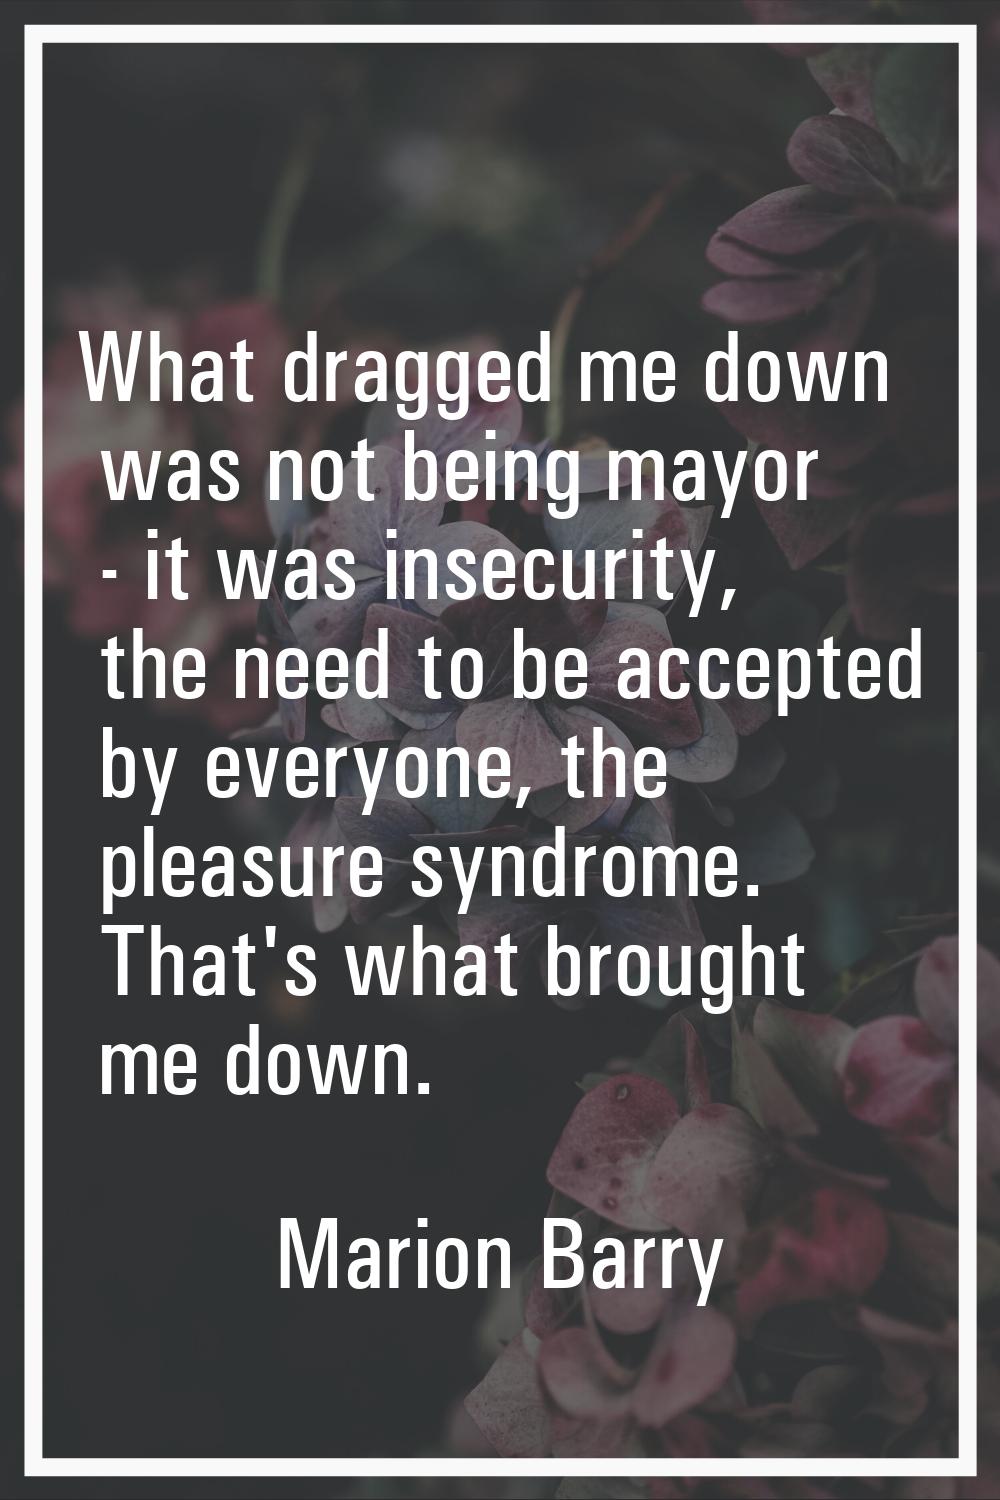 What dragged me down was not being mayor - it was insecurity, the need to be accepted by everyone, 